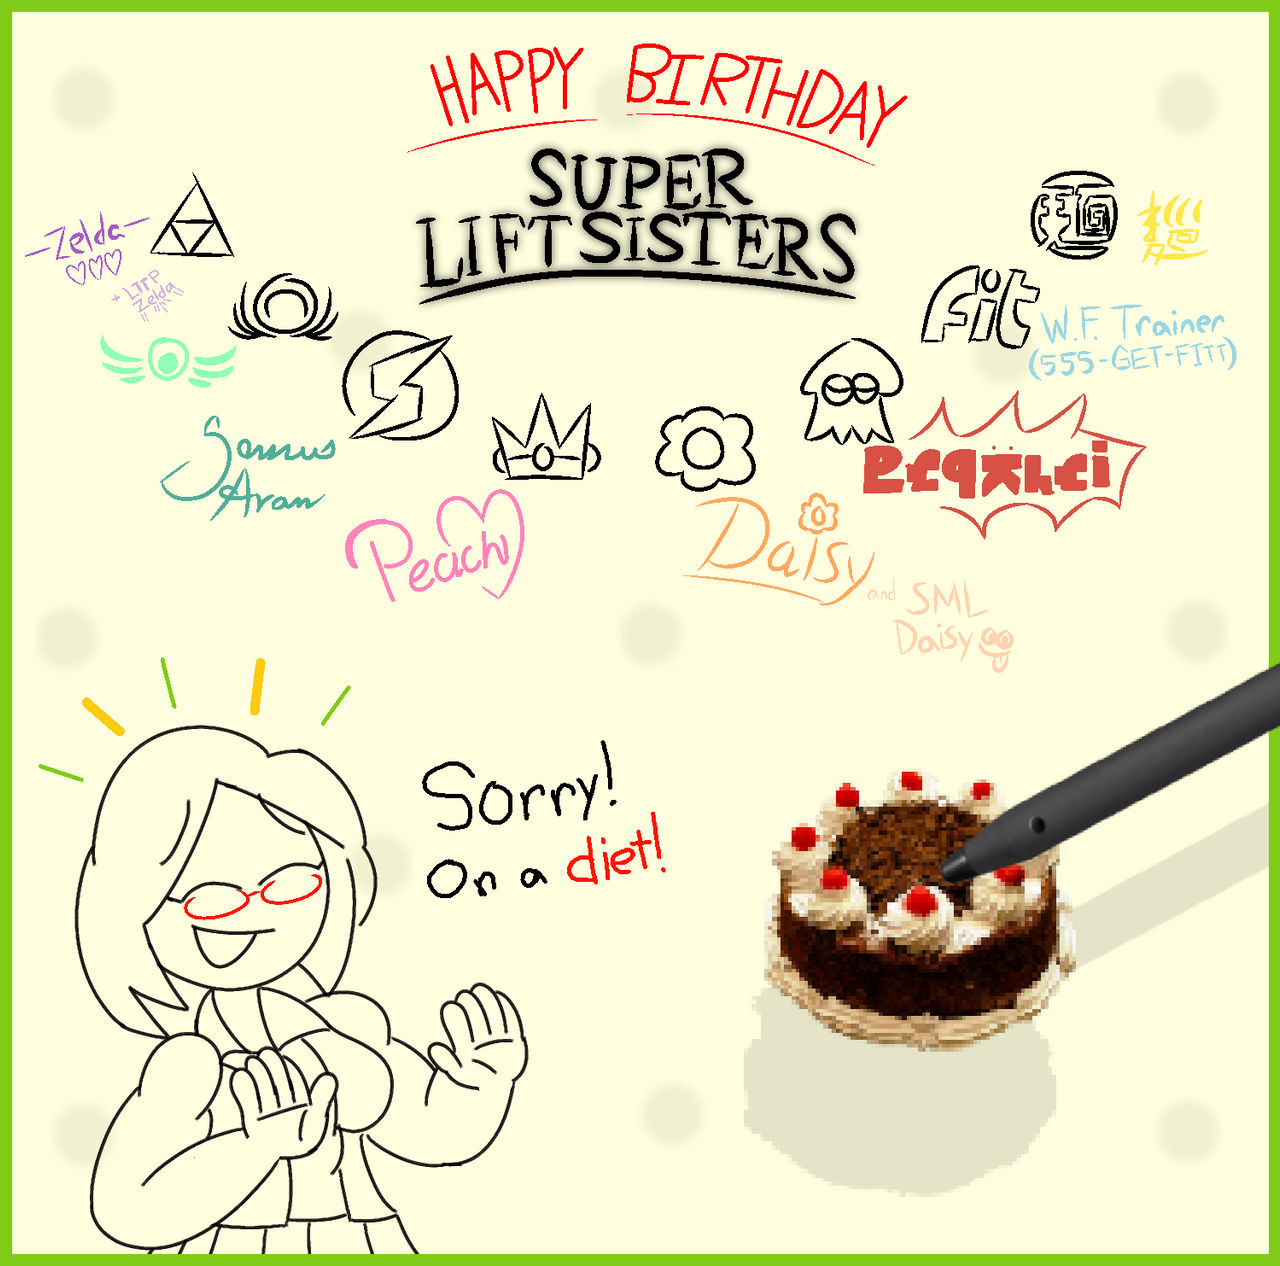 Happy Birthday, Super Lift Sisters! by TopicalFriend777 on DeviantArt